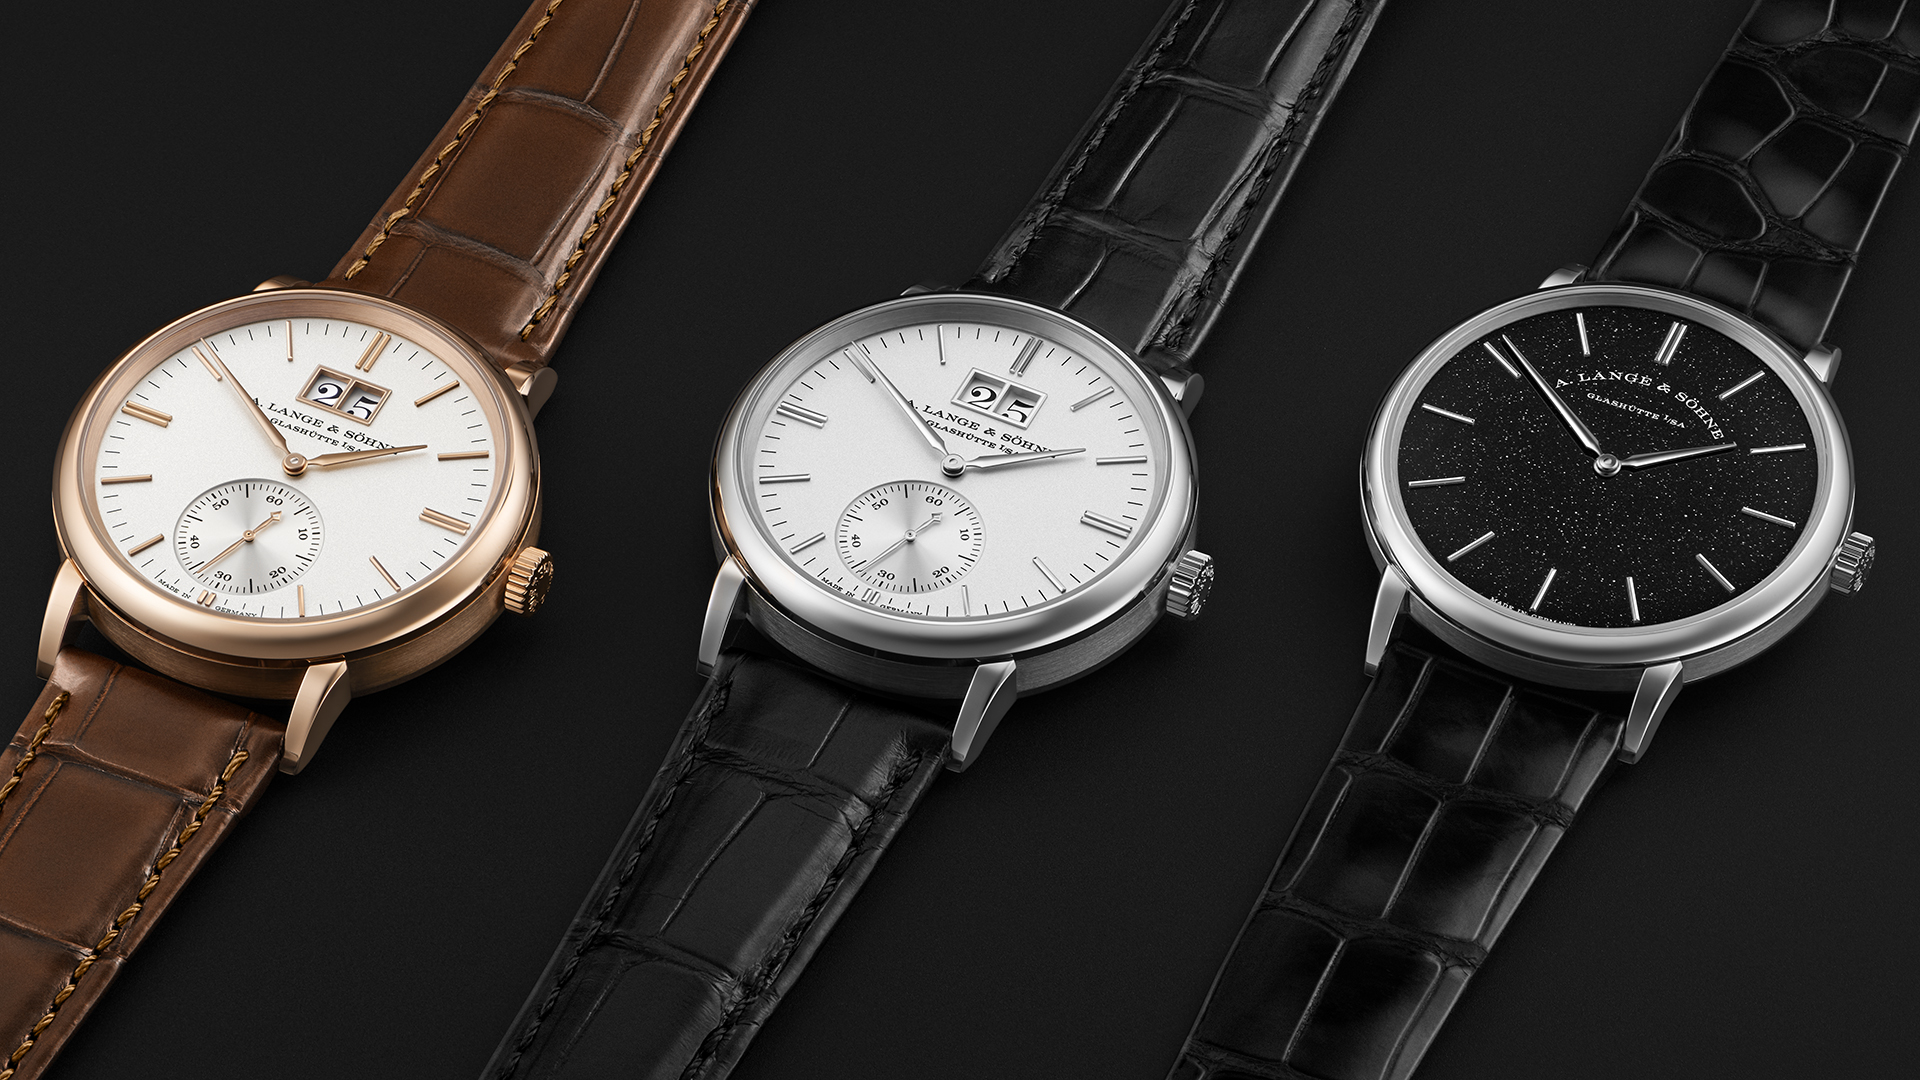 A. Lange & Söhne Celebrates 30 Years Of Revival With Two New Saxonia Watch Models